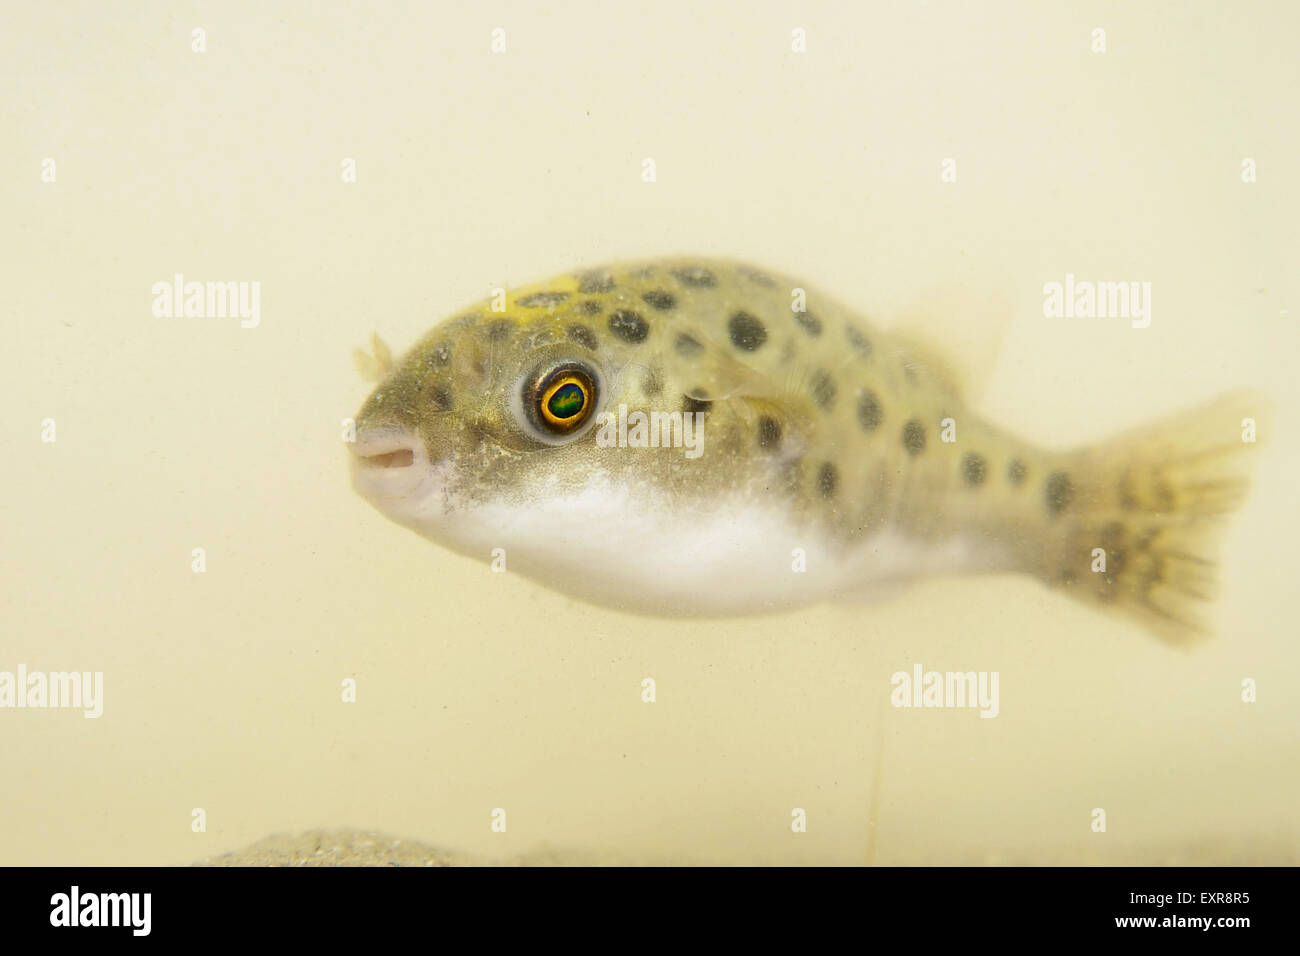 Portrait of a Green Spotted Puffer Fish Stock Photo